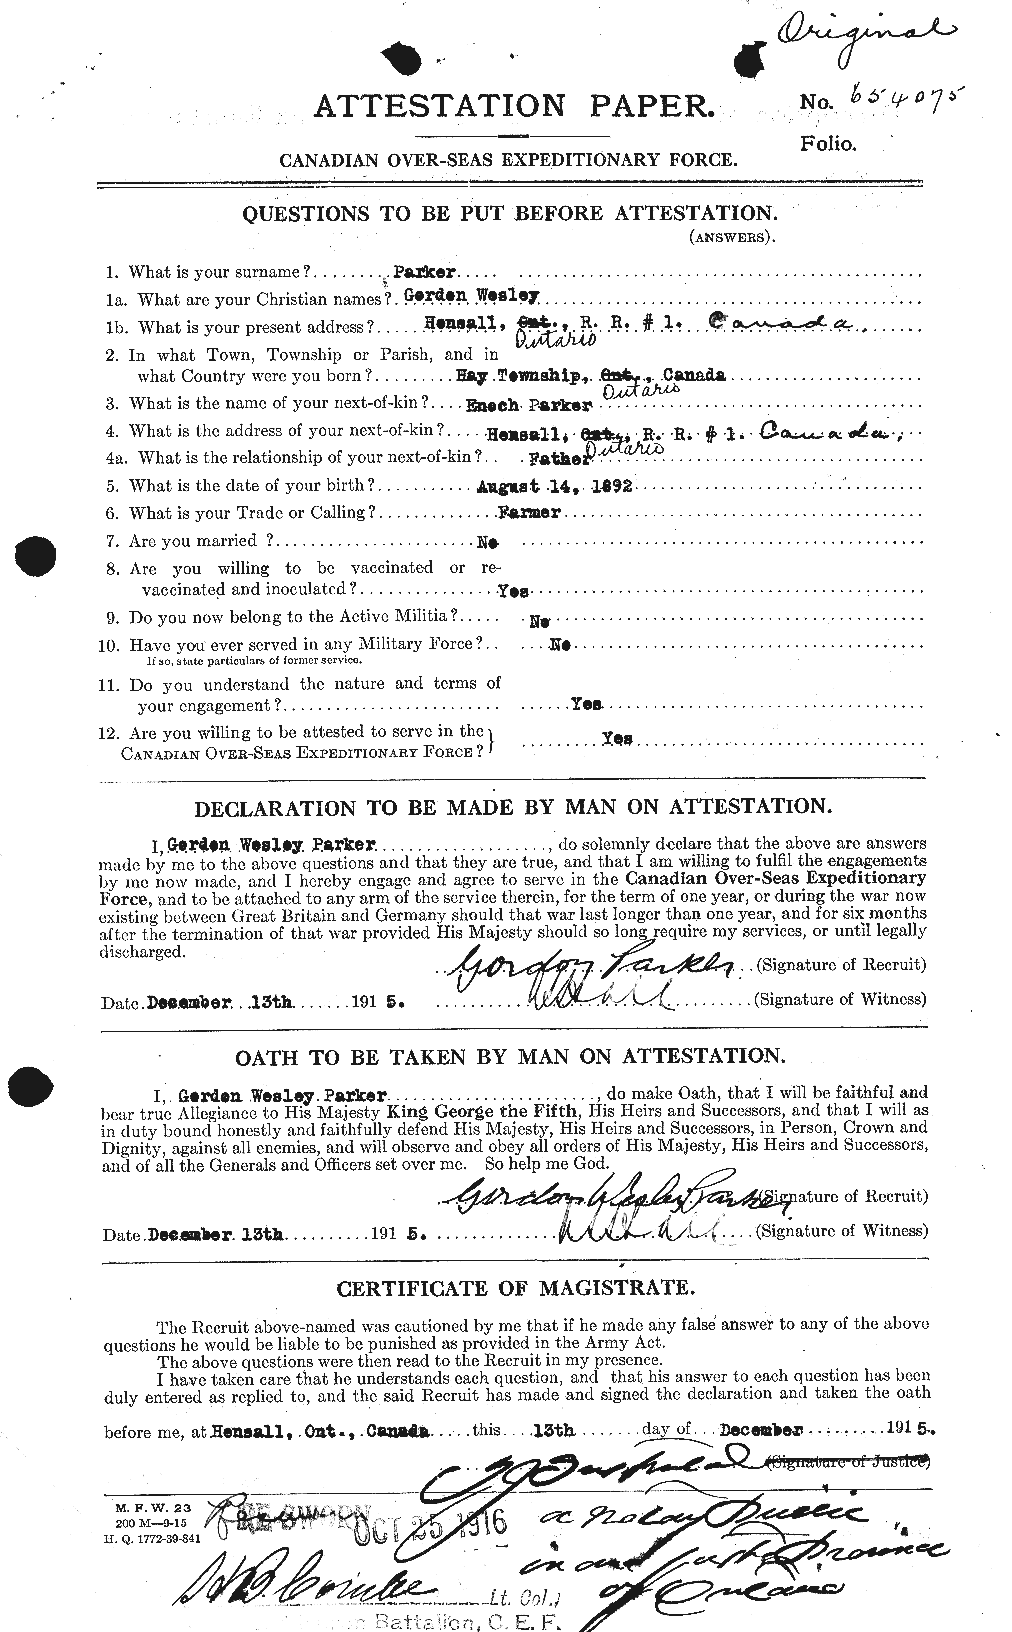 Personnel Records of the First World War - CEF 565299a